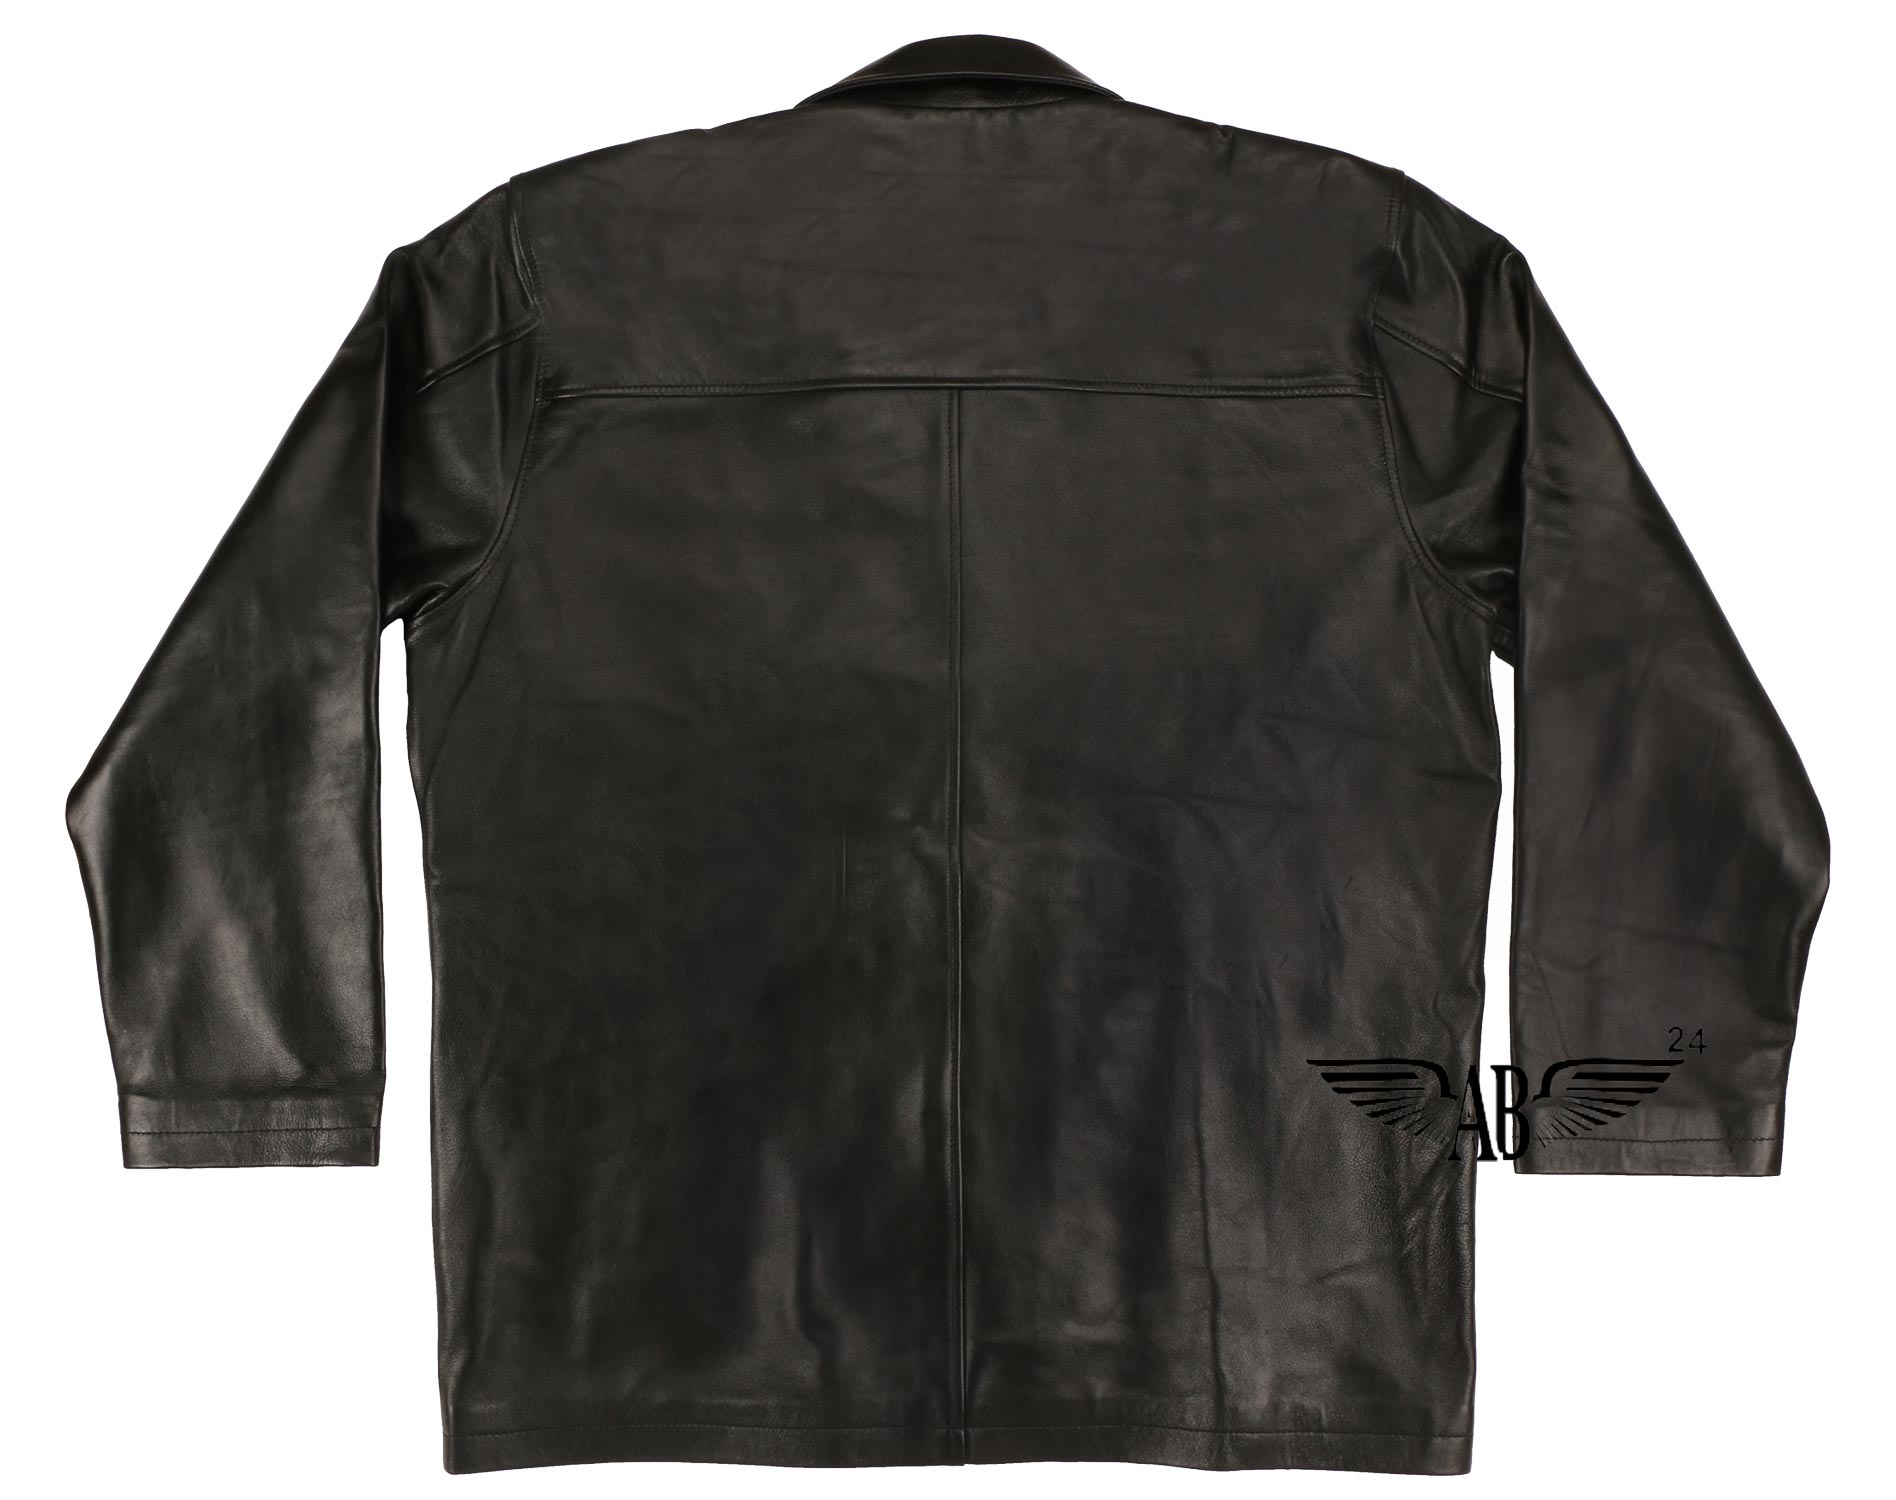 Front image of black CLASSIC CAR COAT.  It depicts  collar with Tag